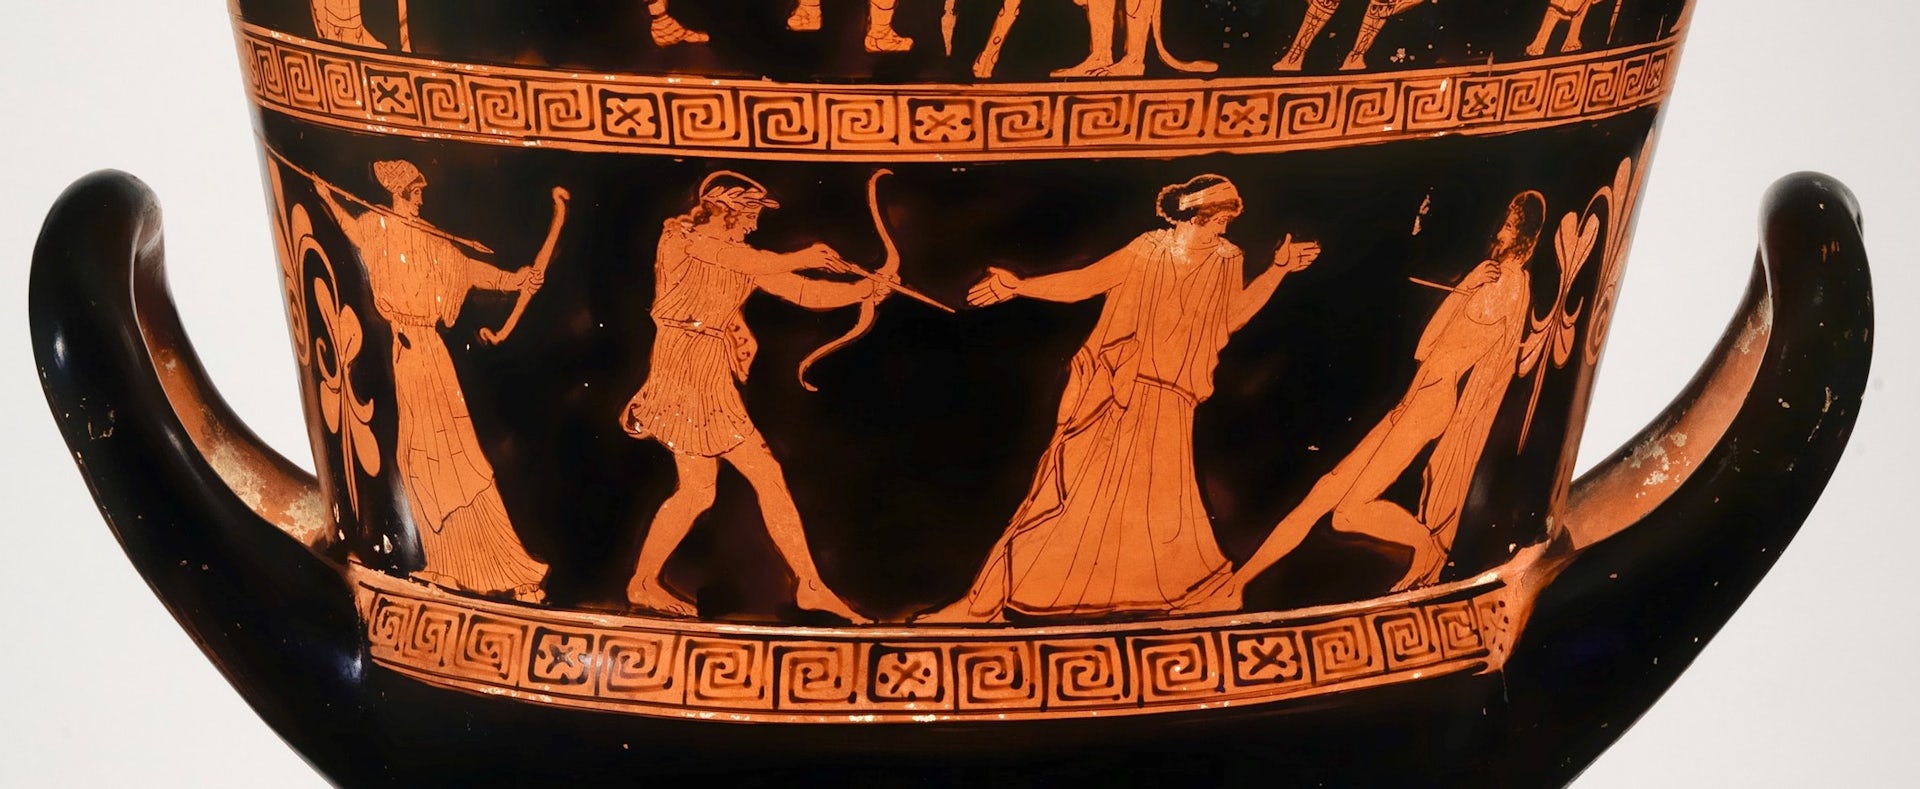 Vase painting of Artemis and Apollo killing Tityus by the Nekyia Painter